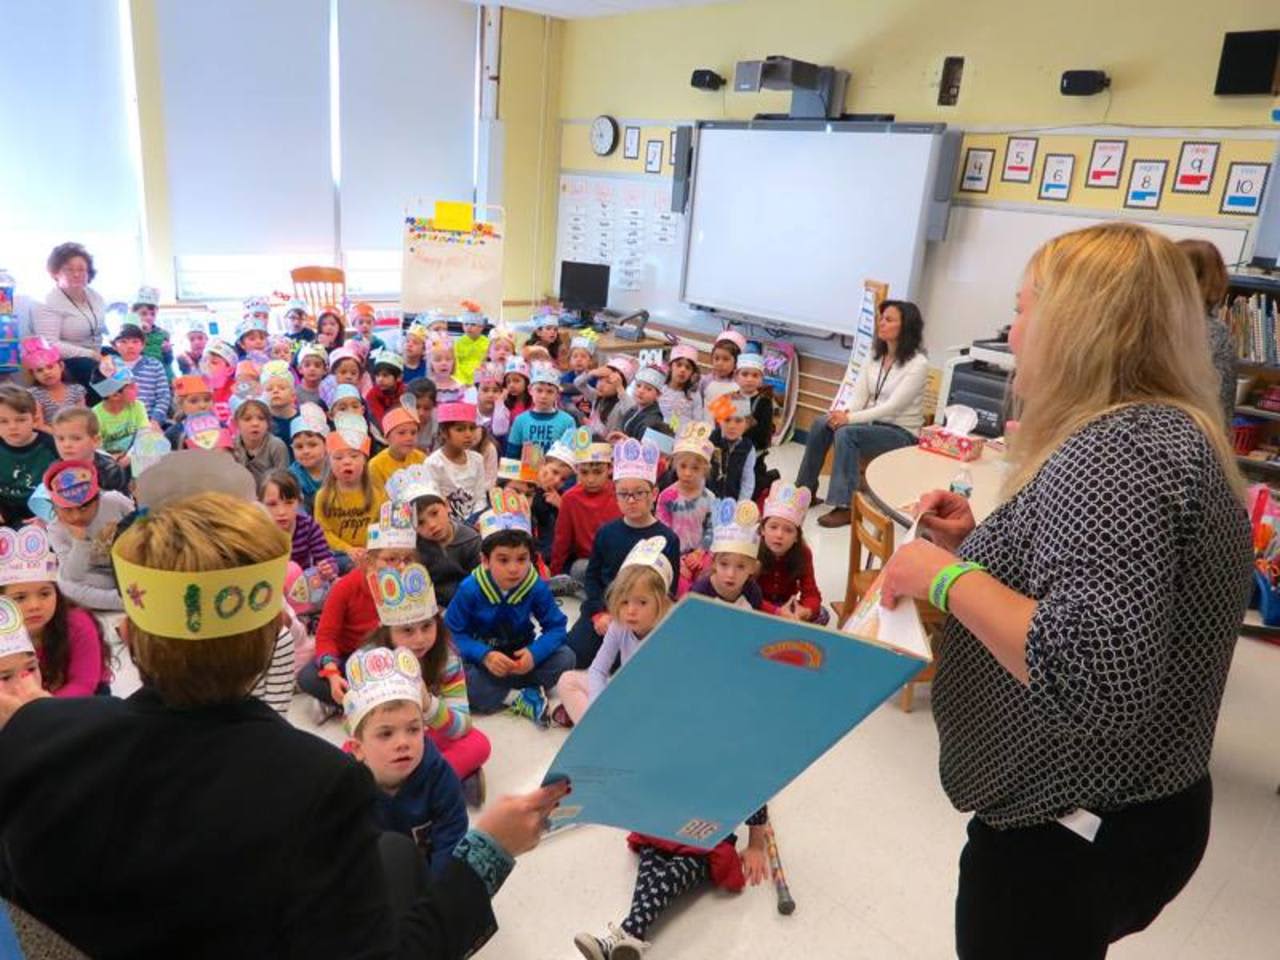 Students take part in celebration of 100th day of school.